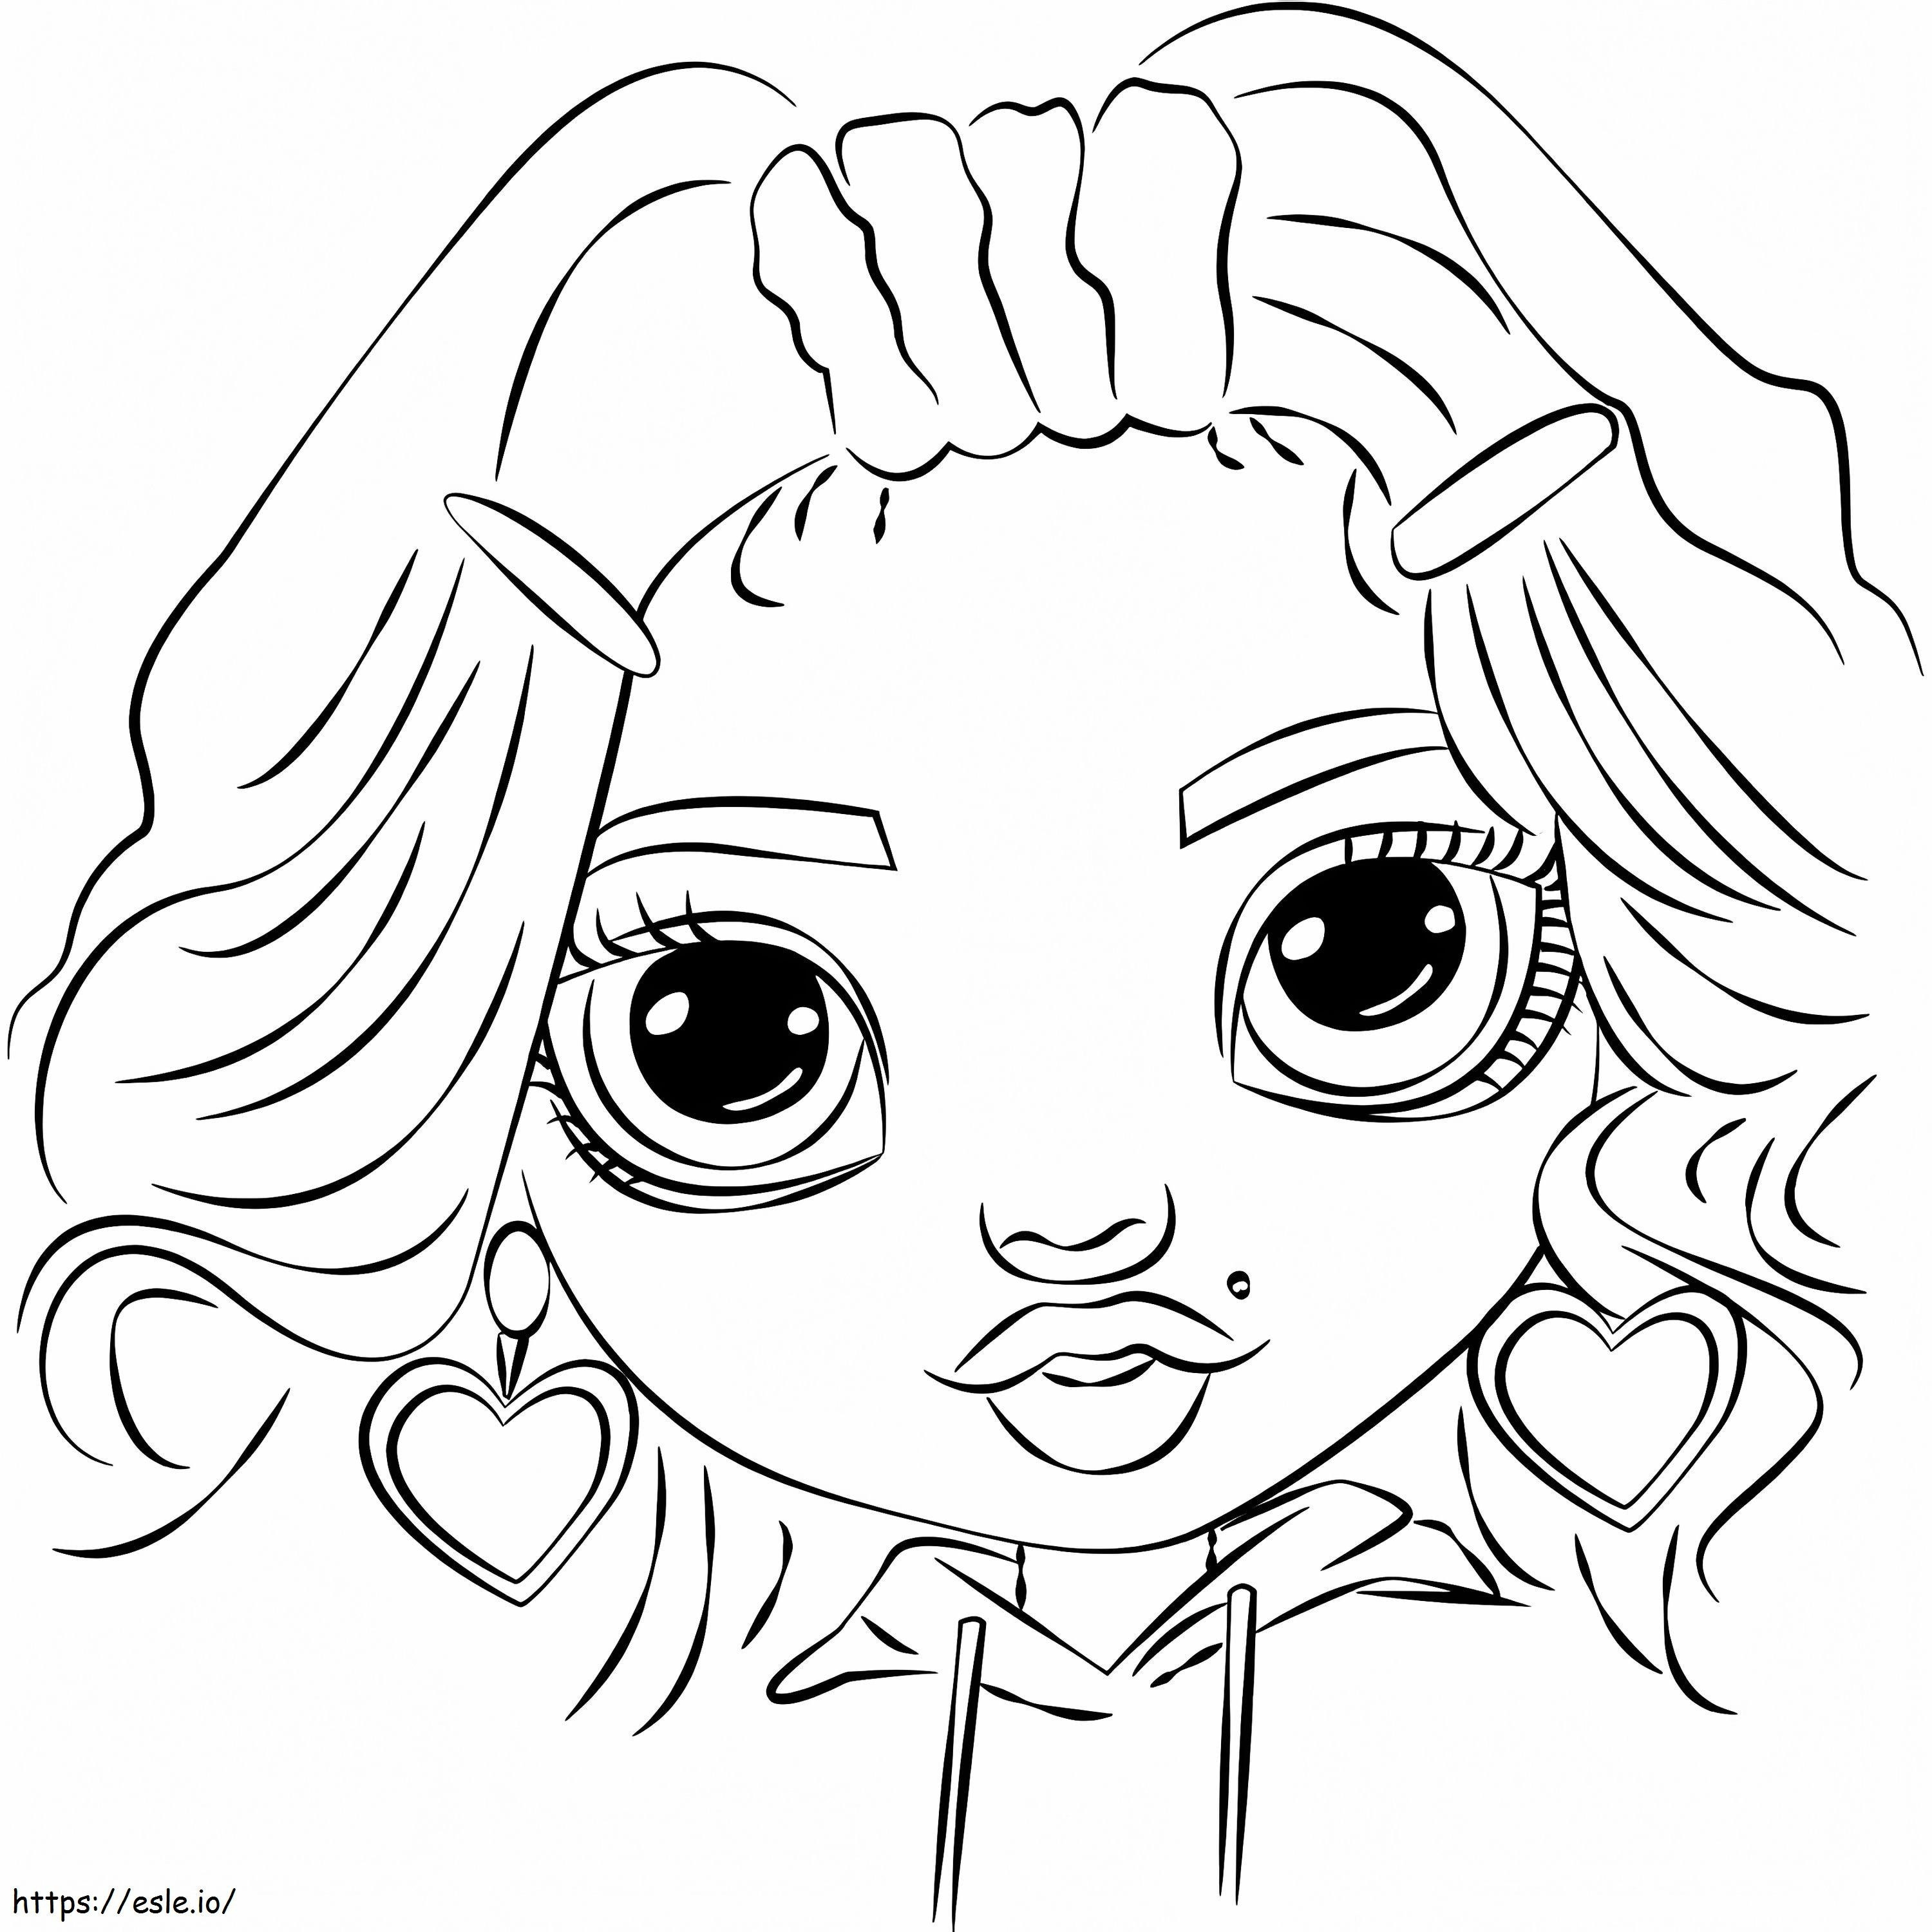 Rainbow High Doll coloring page